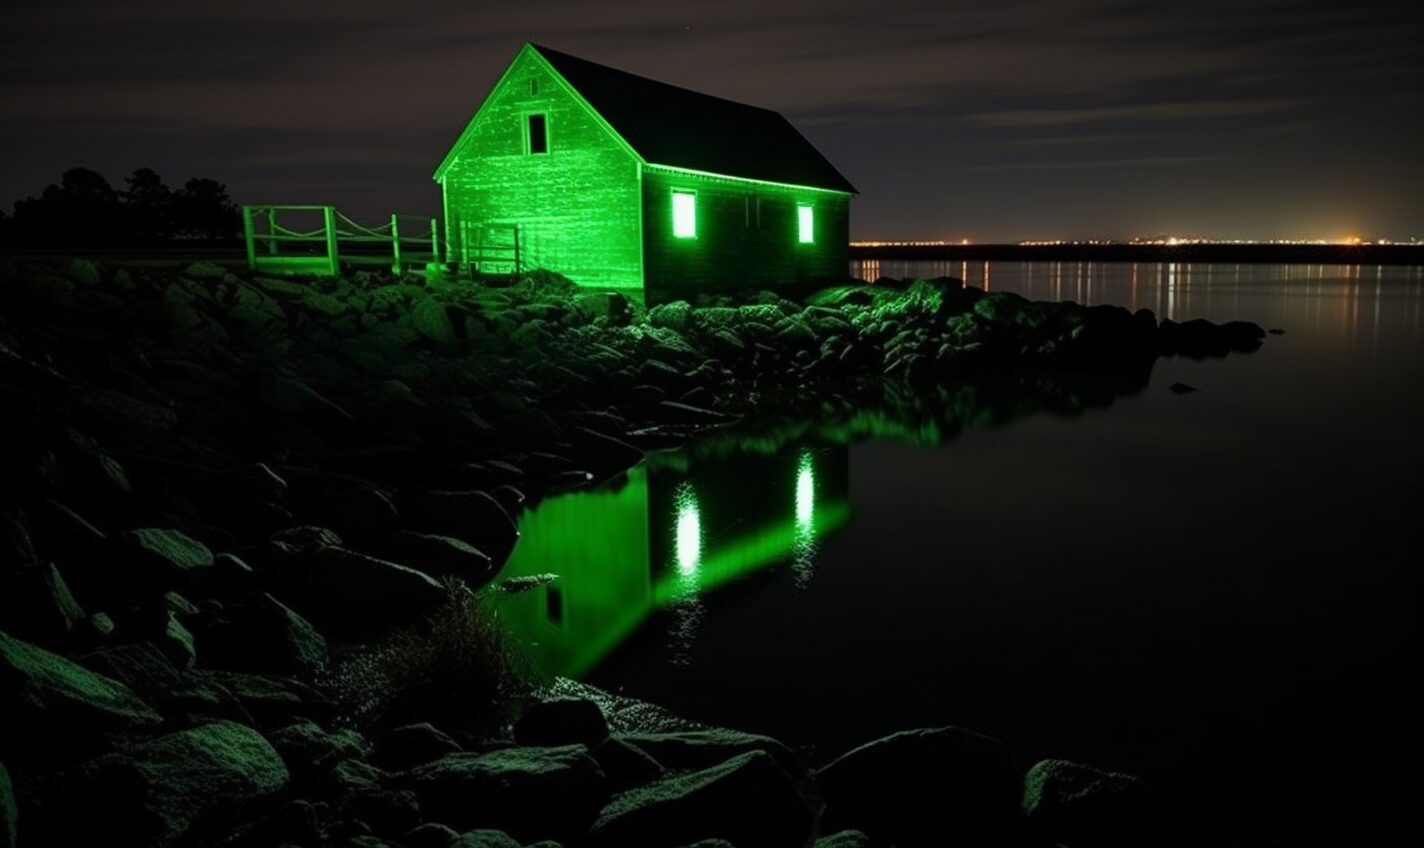 cranston, rhode island in a black and neon green glow